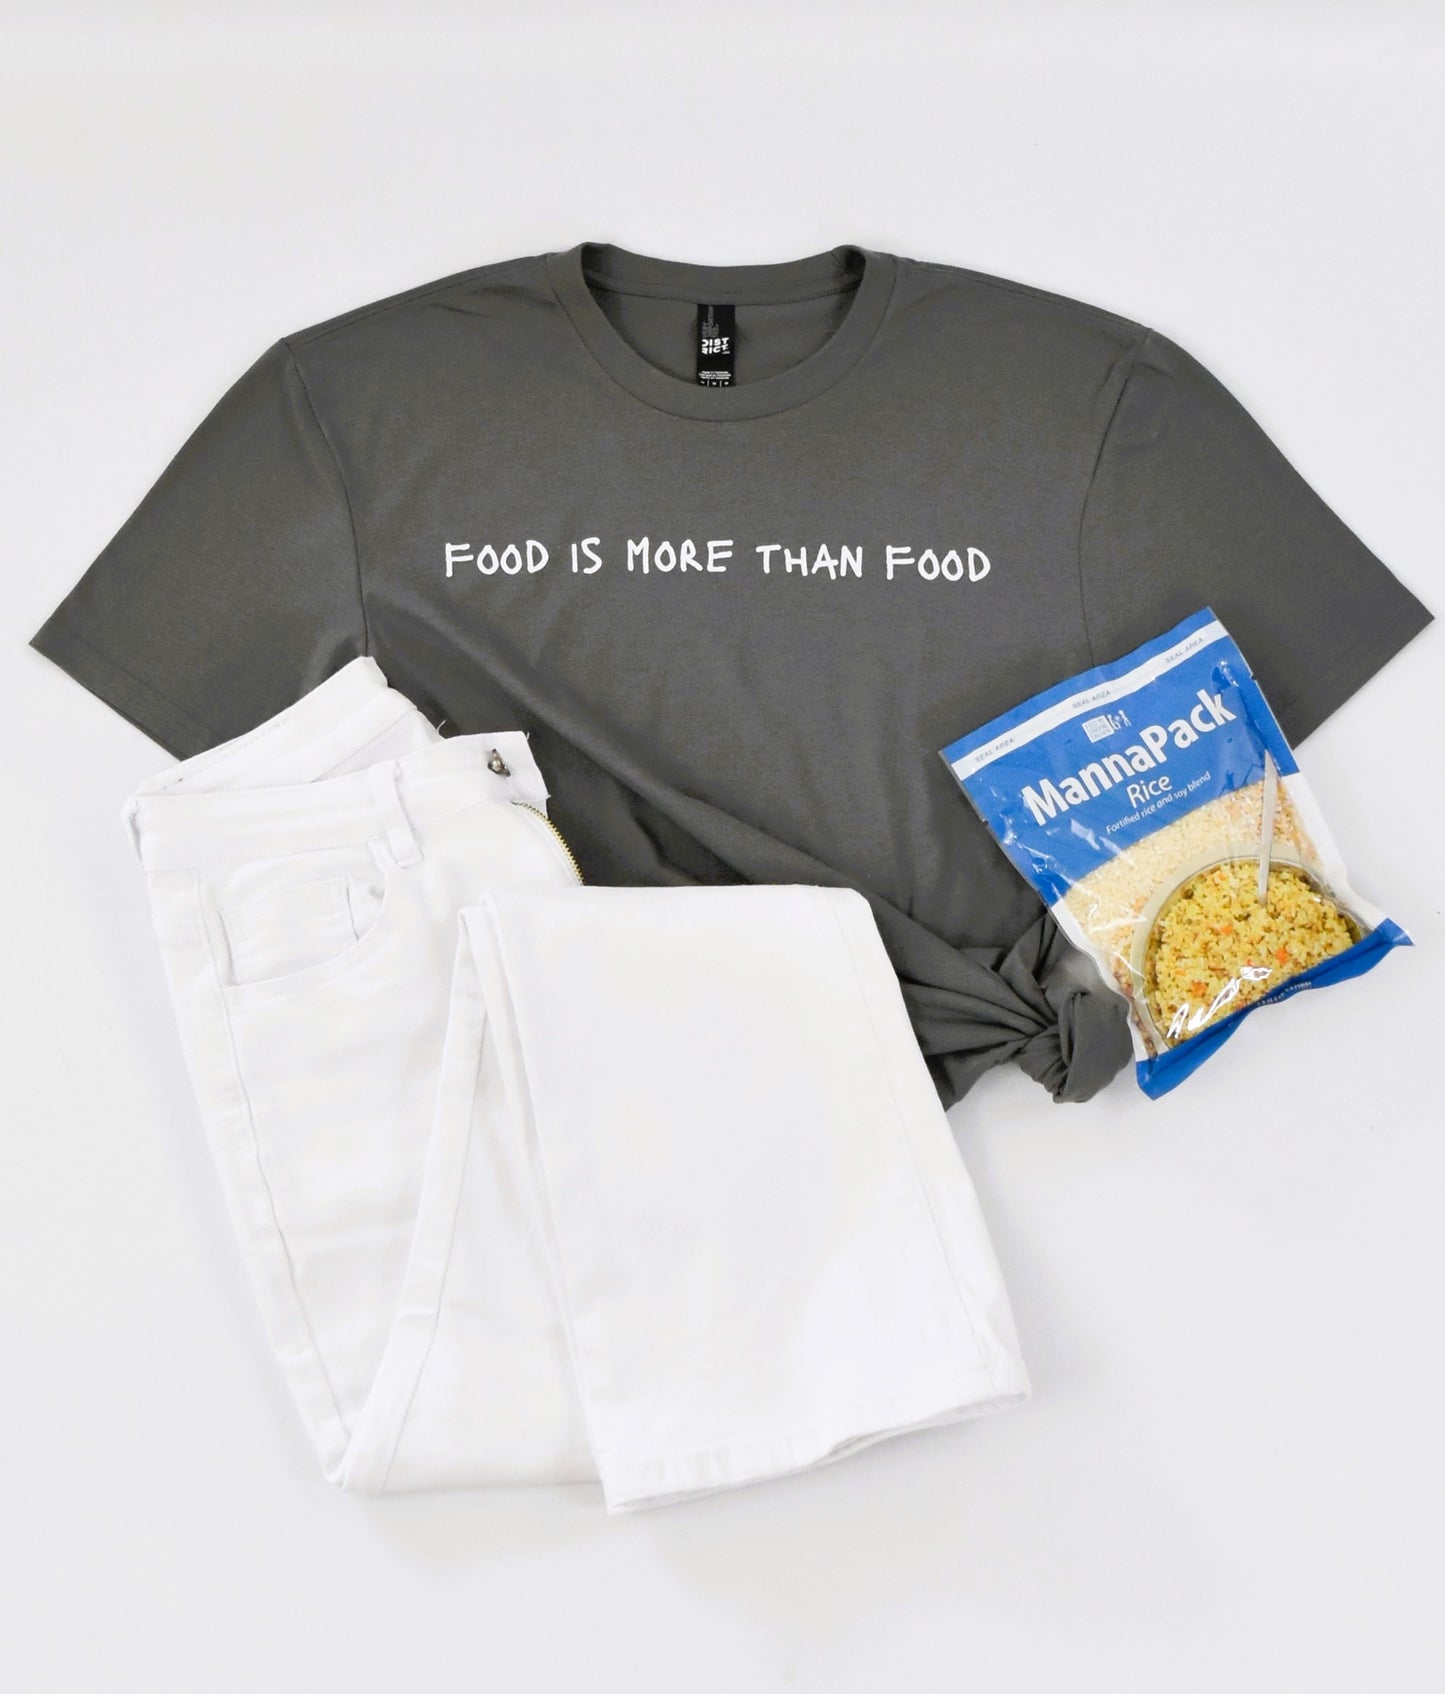 Food Is More T-Shirt - 10 MEALion challenge